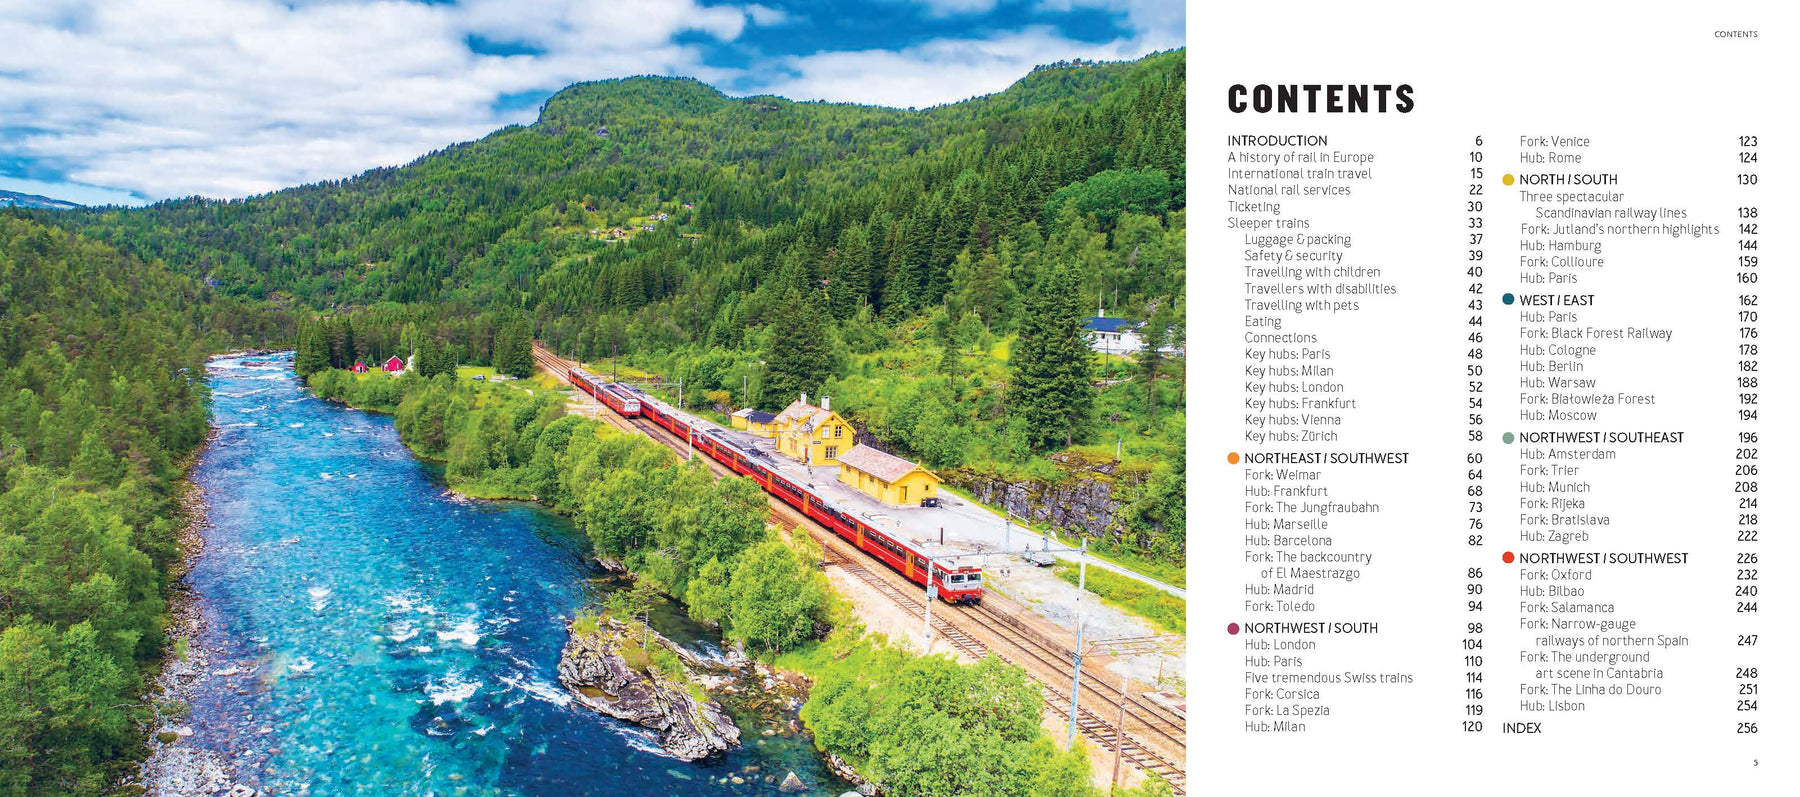 Lonely Planet's Guide to Train Travel in Europe